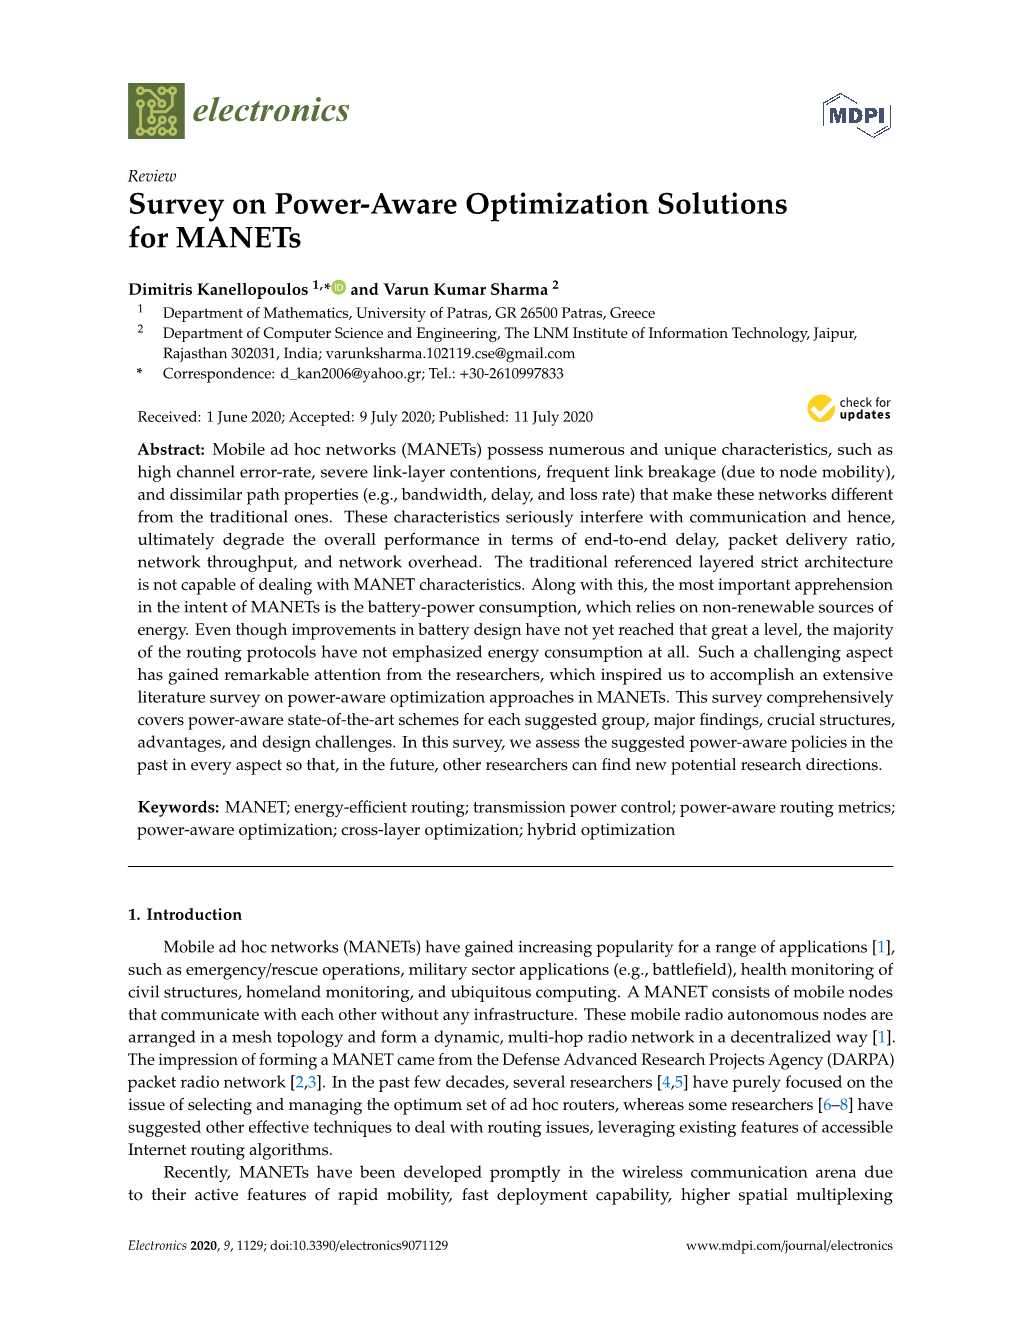 Survey on Power-Aware Optimization Solutions for Manets